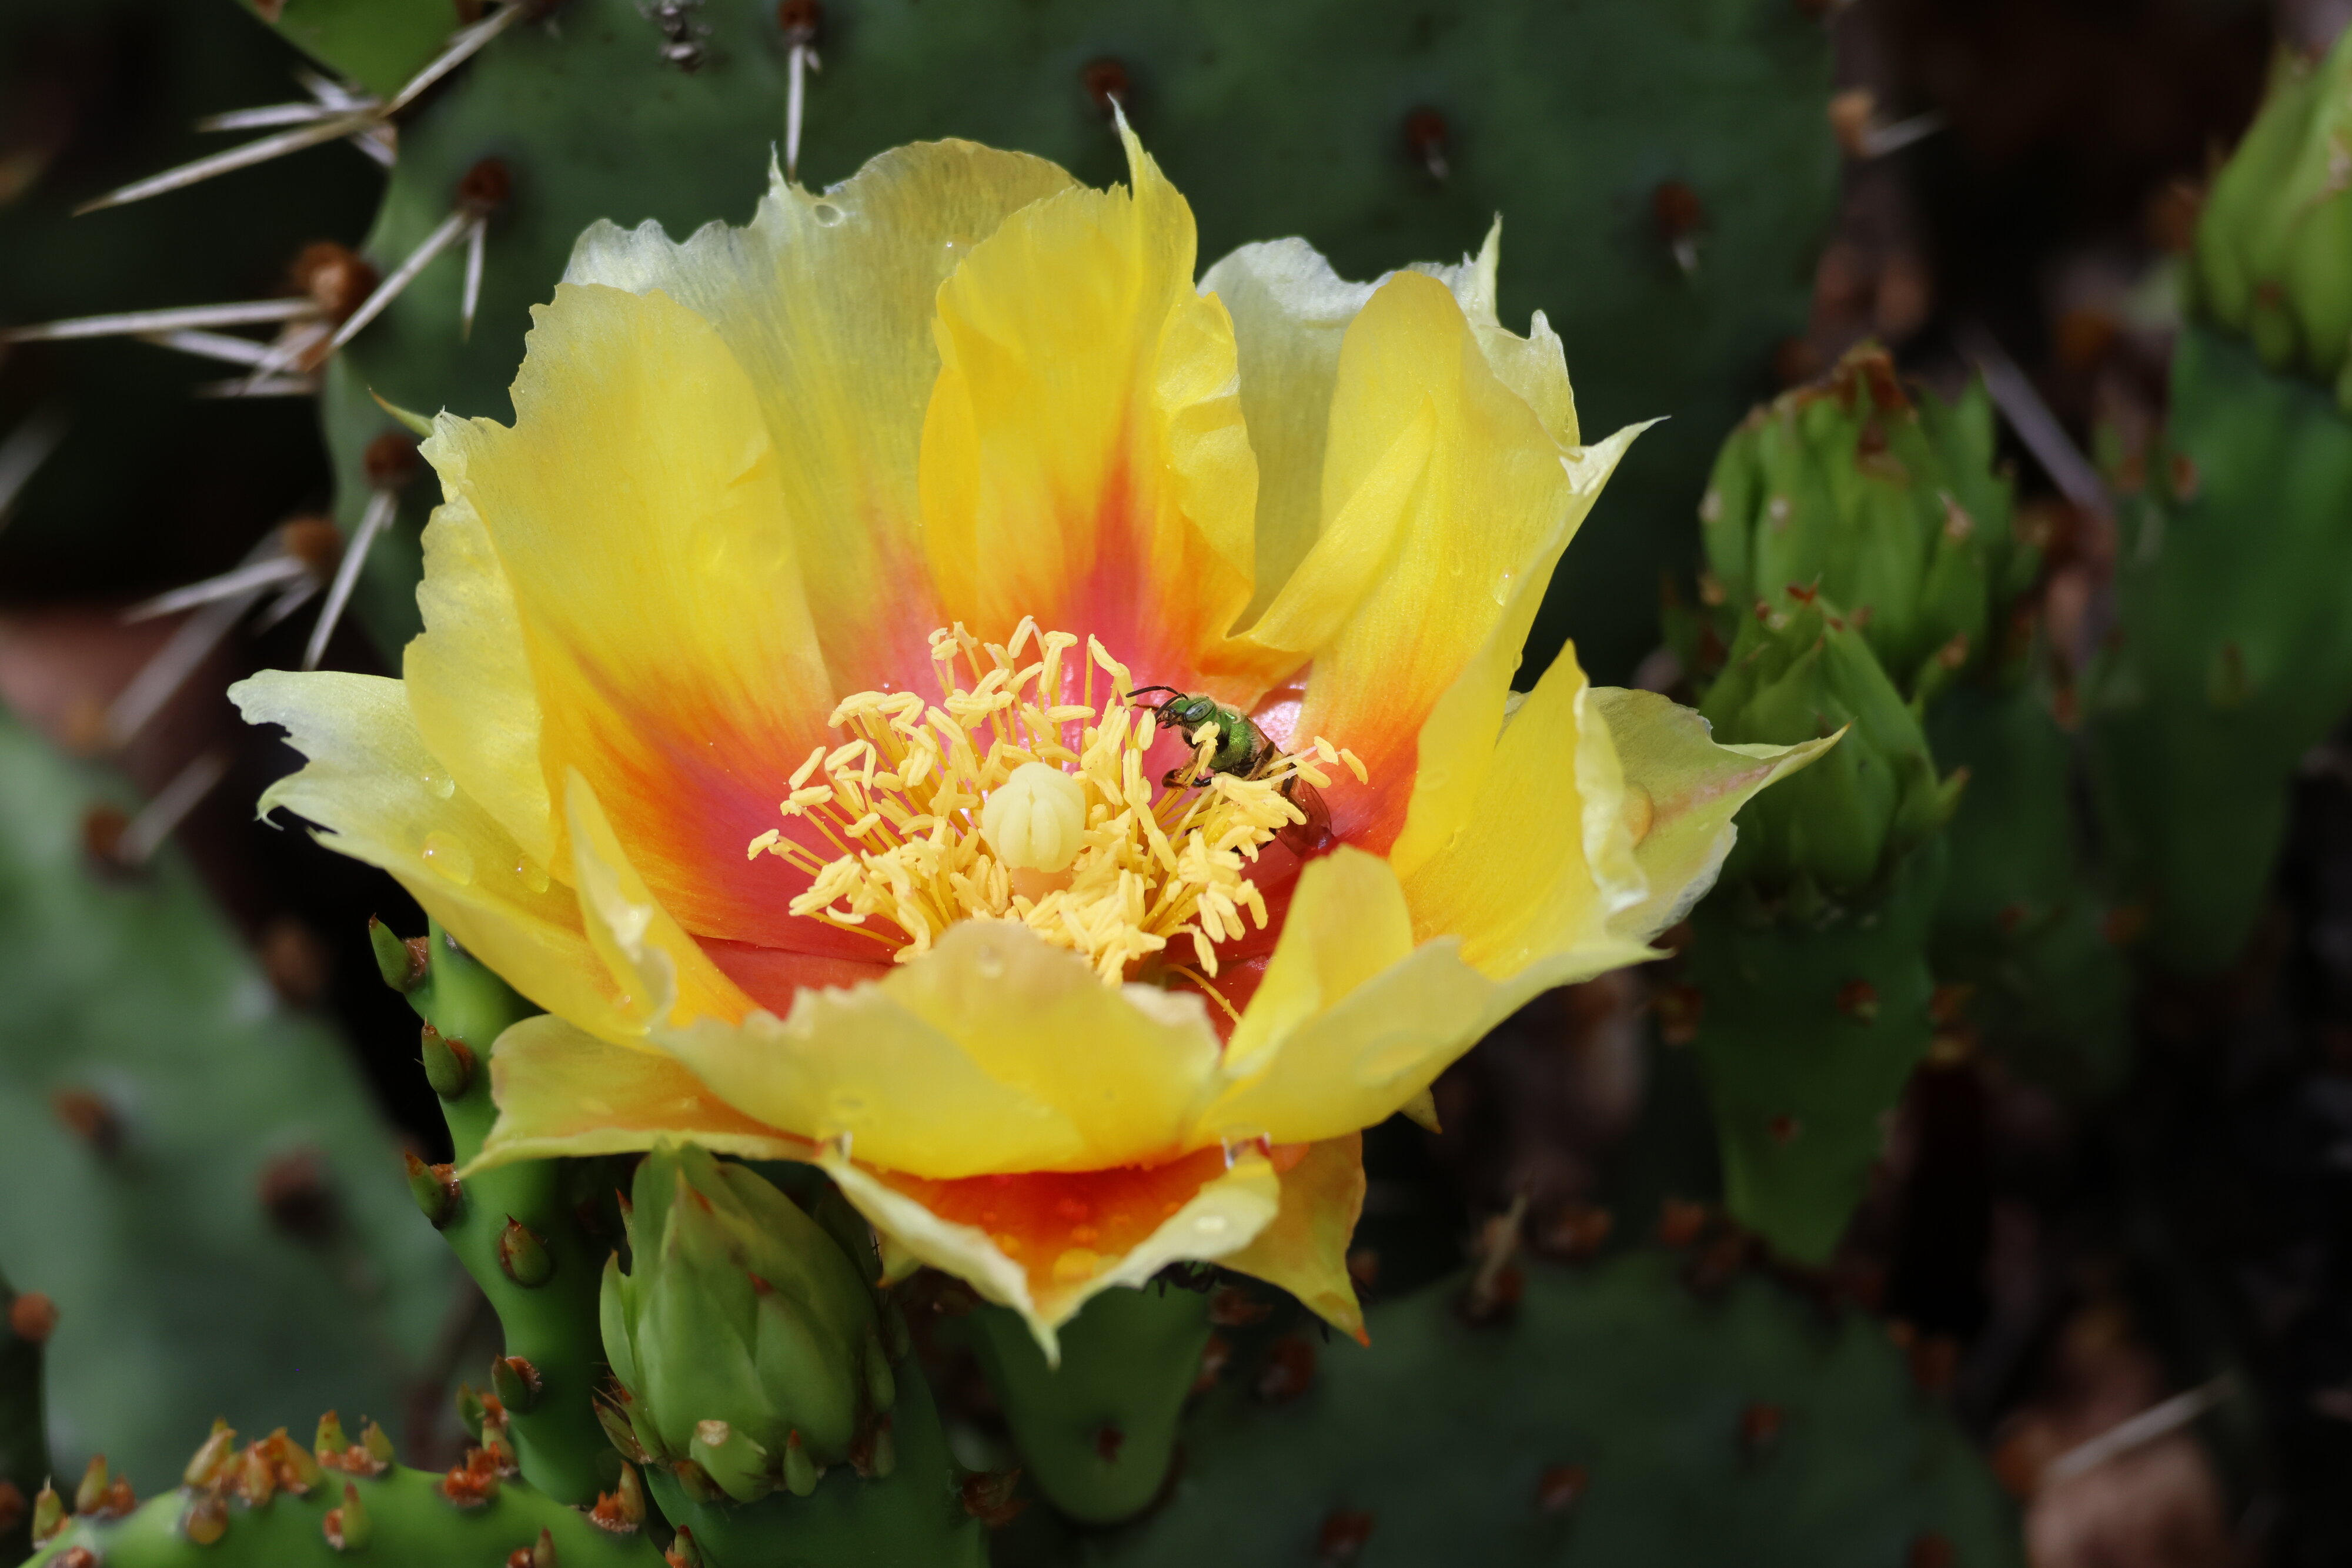 Insects on cactus flowers 2